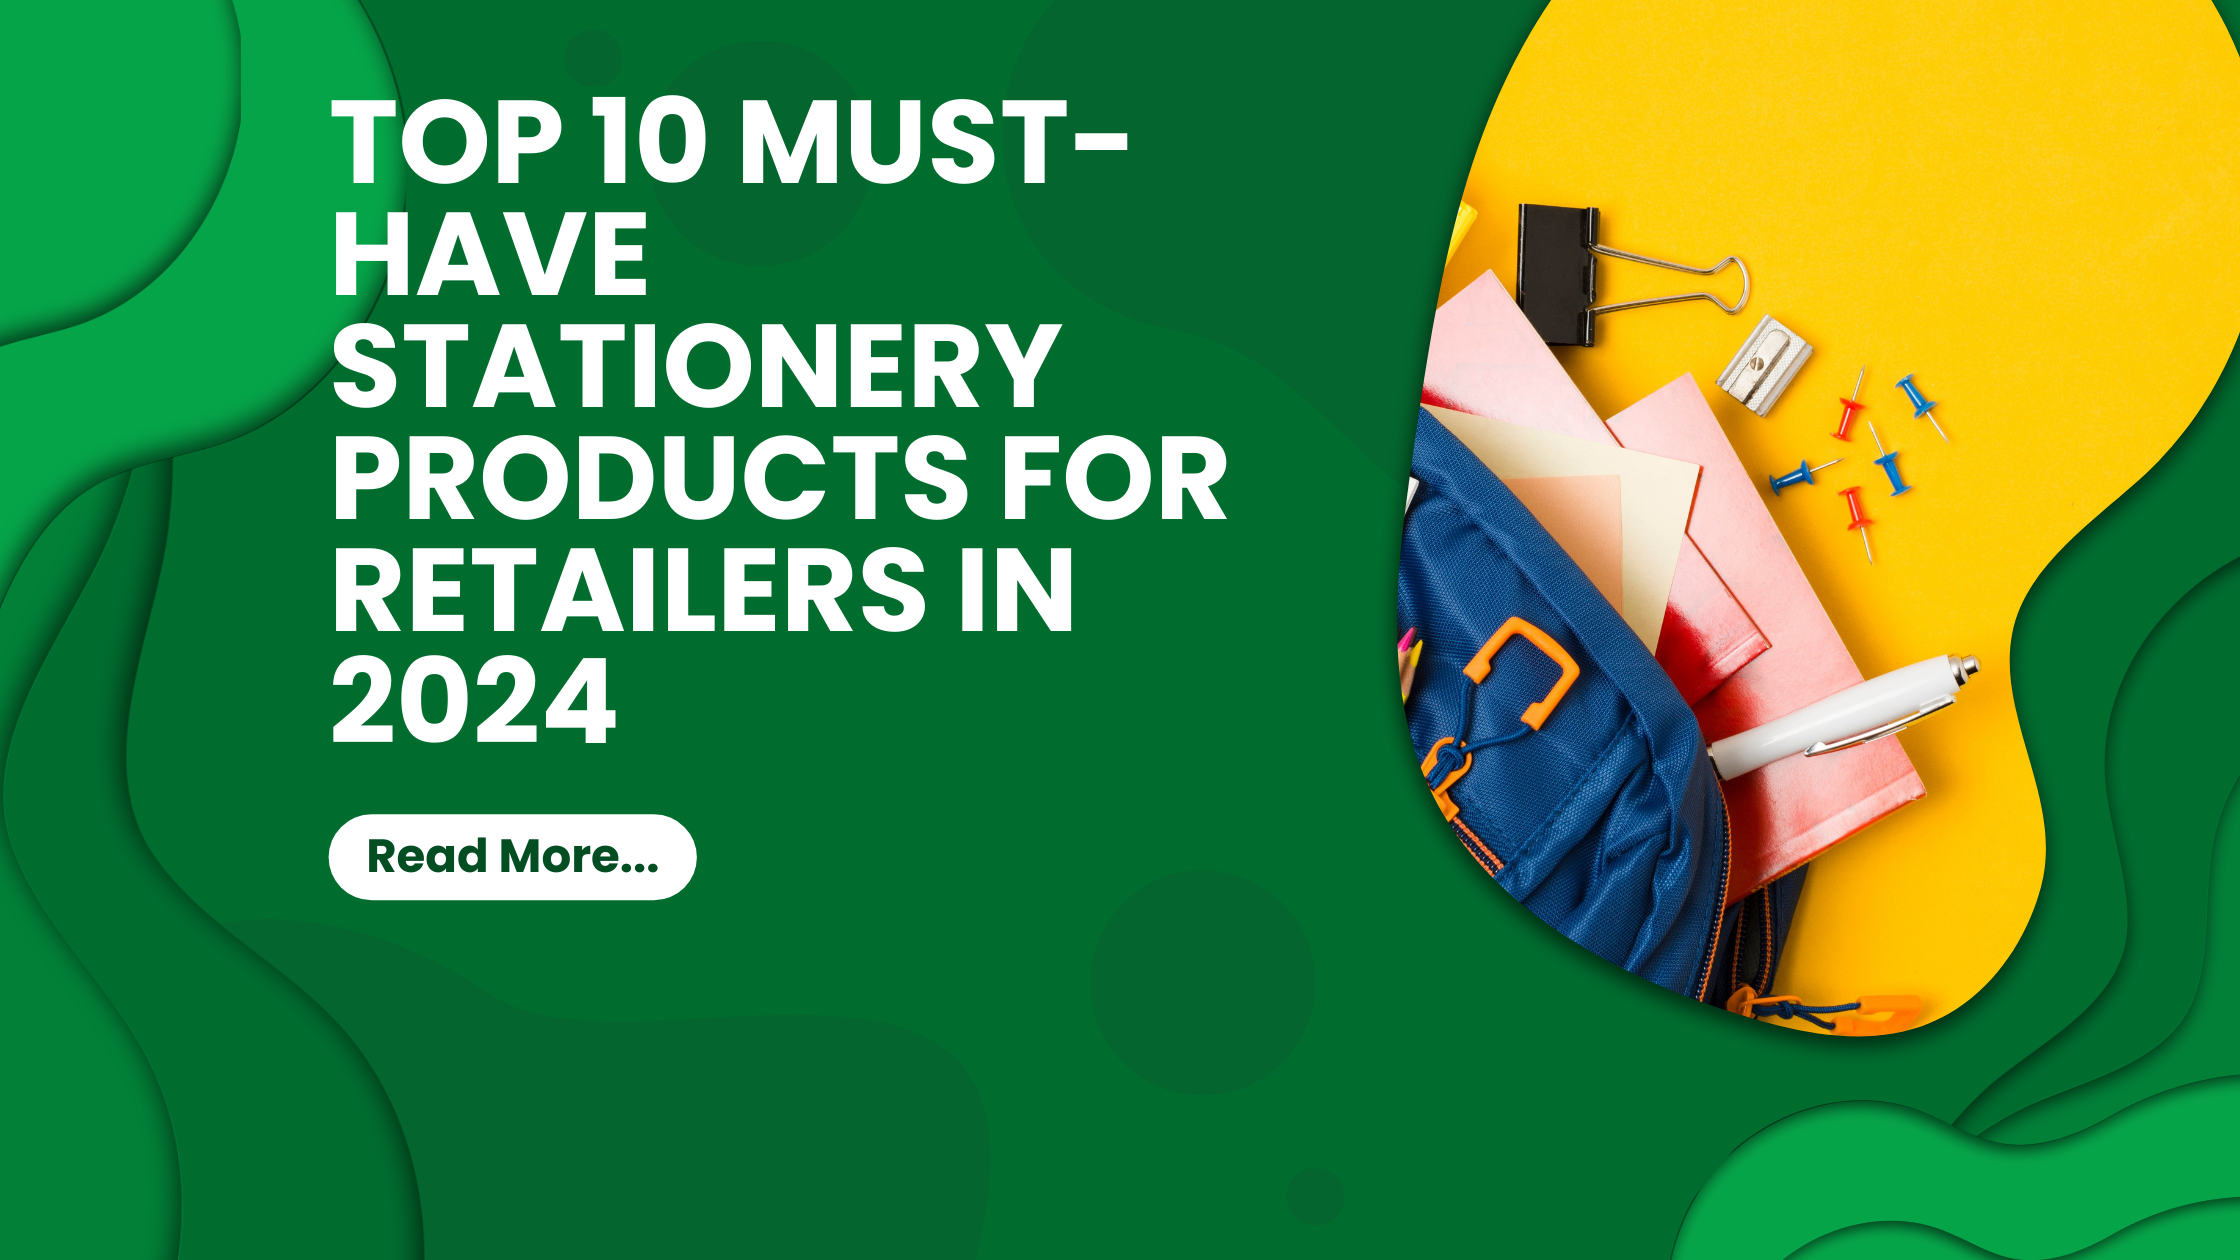 Top 10 Must-Have Stationery Products for Retailers in 2024